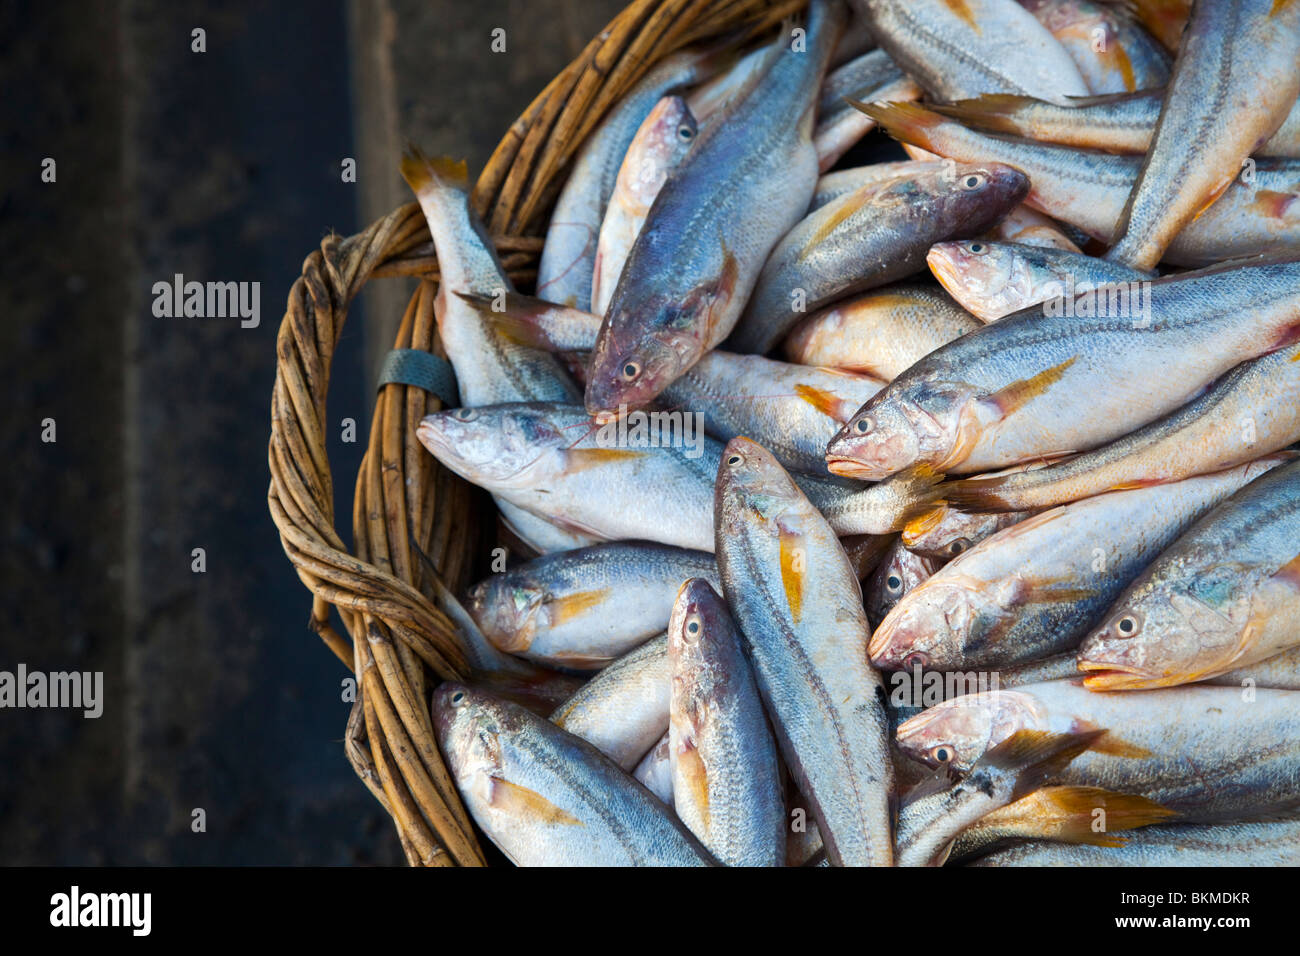 Baskets of fish for sale on the waterfront in Sandakan, Sabah, Borneo, Malaysia. Stock Photo